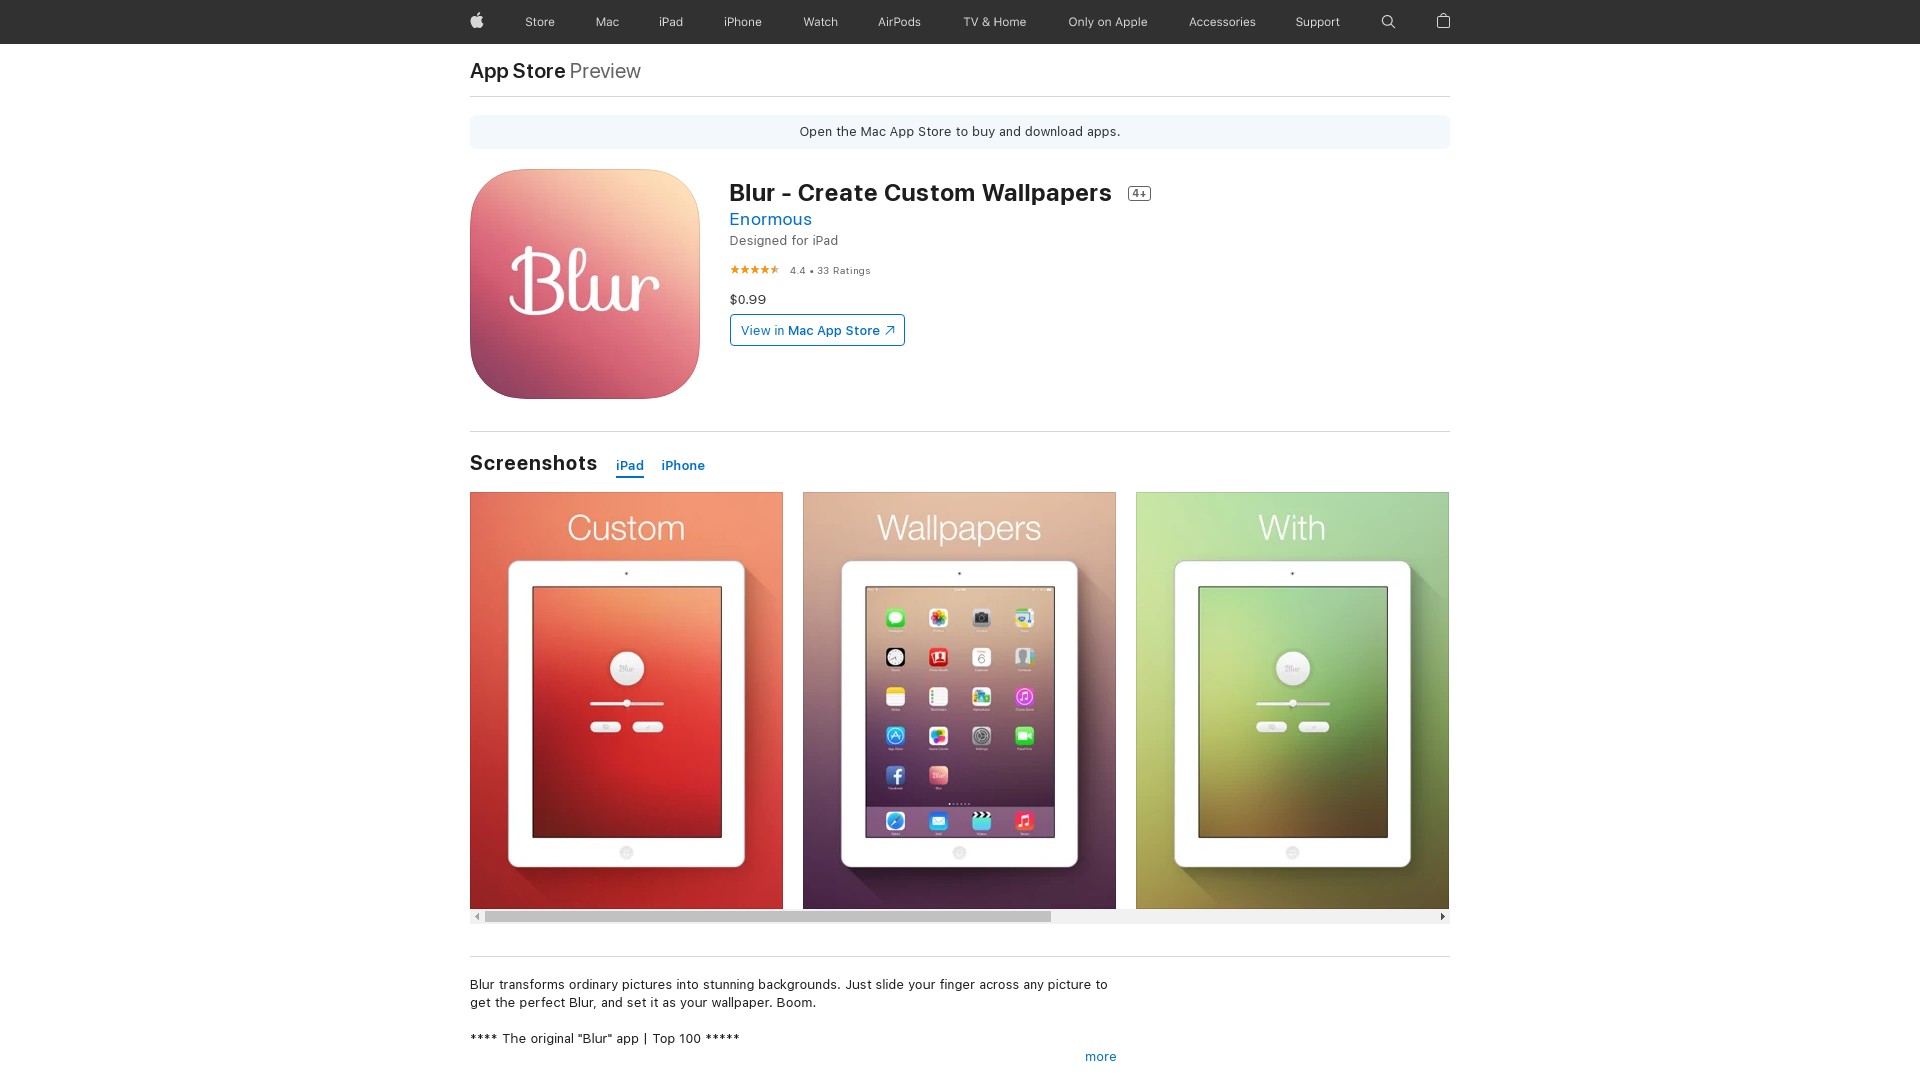 Blur Wallpaper is simplicity. Use it to blur, dim and remove colors from your current wallpaper. It is built with a strict focus on aesthetics.